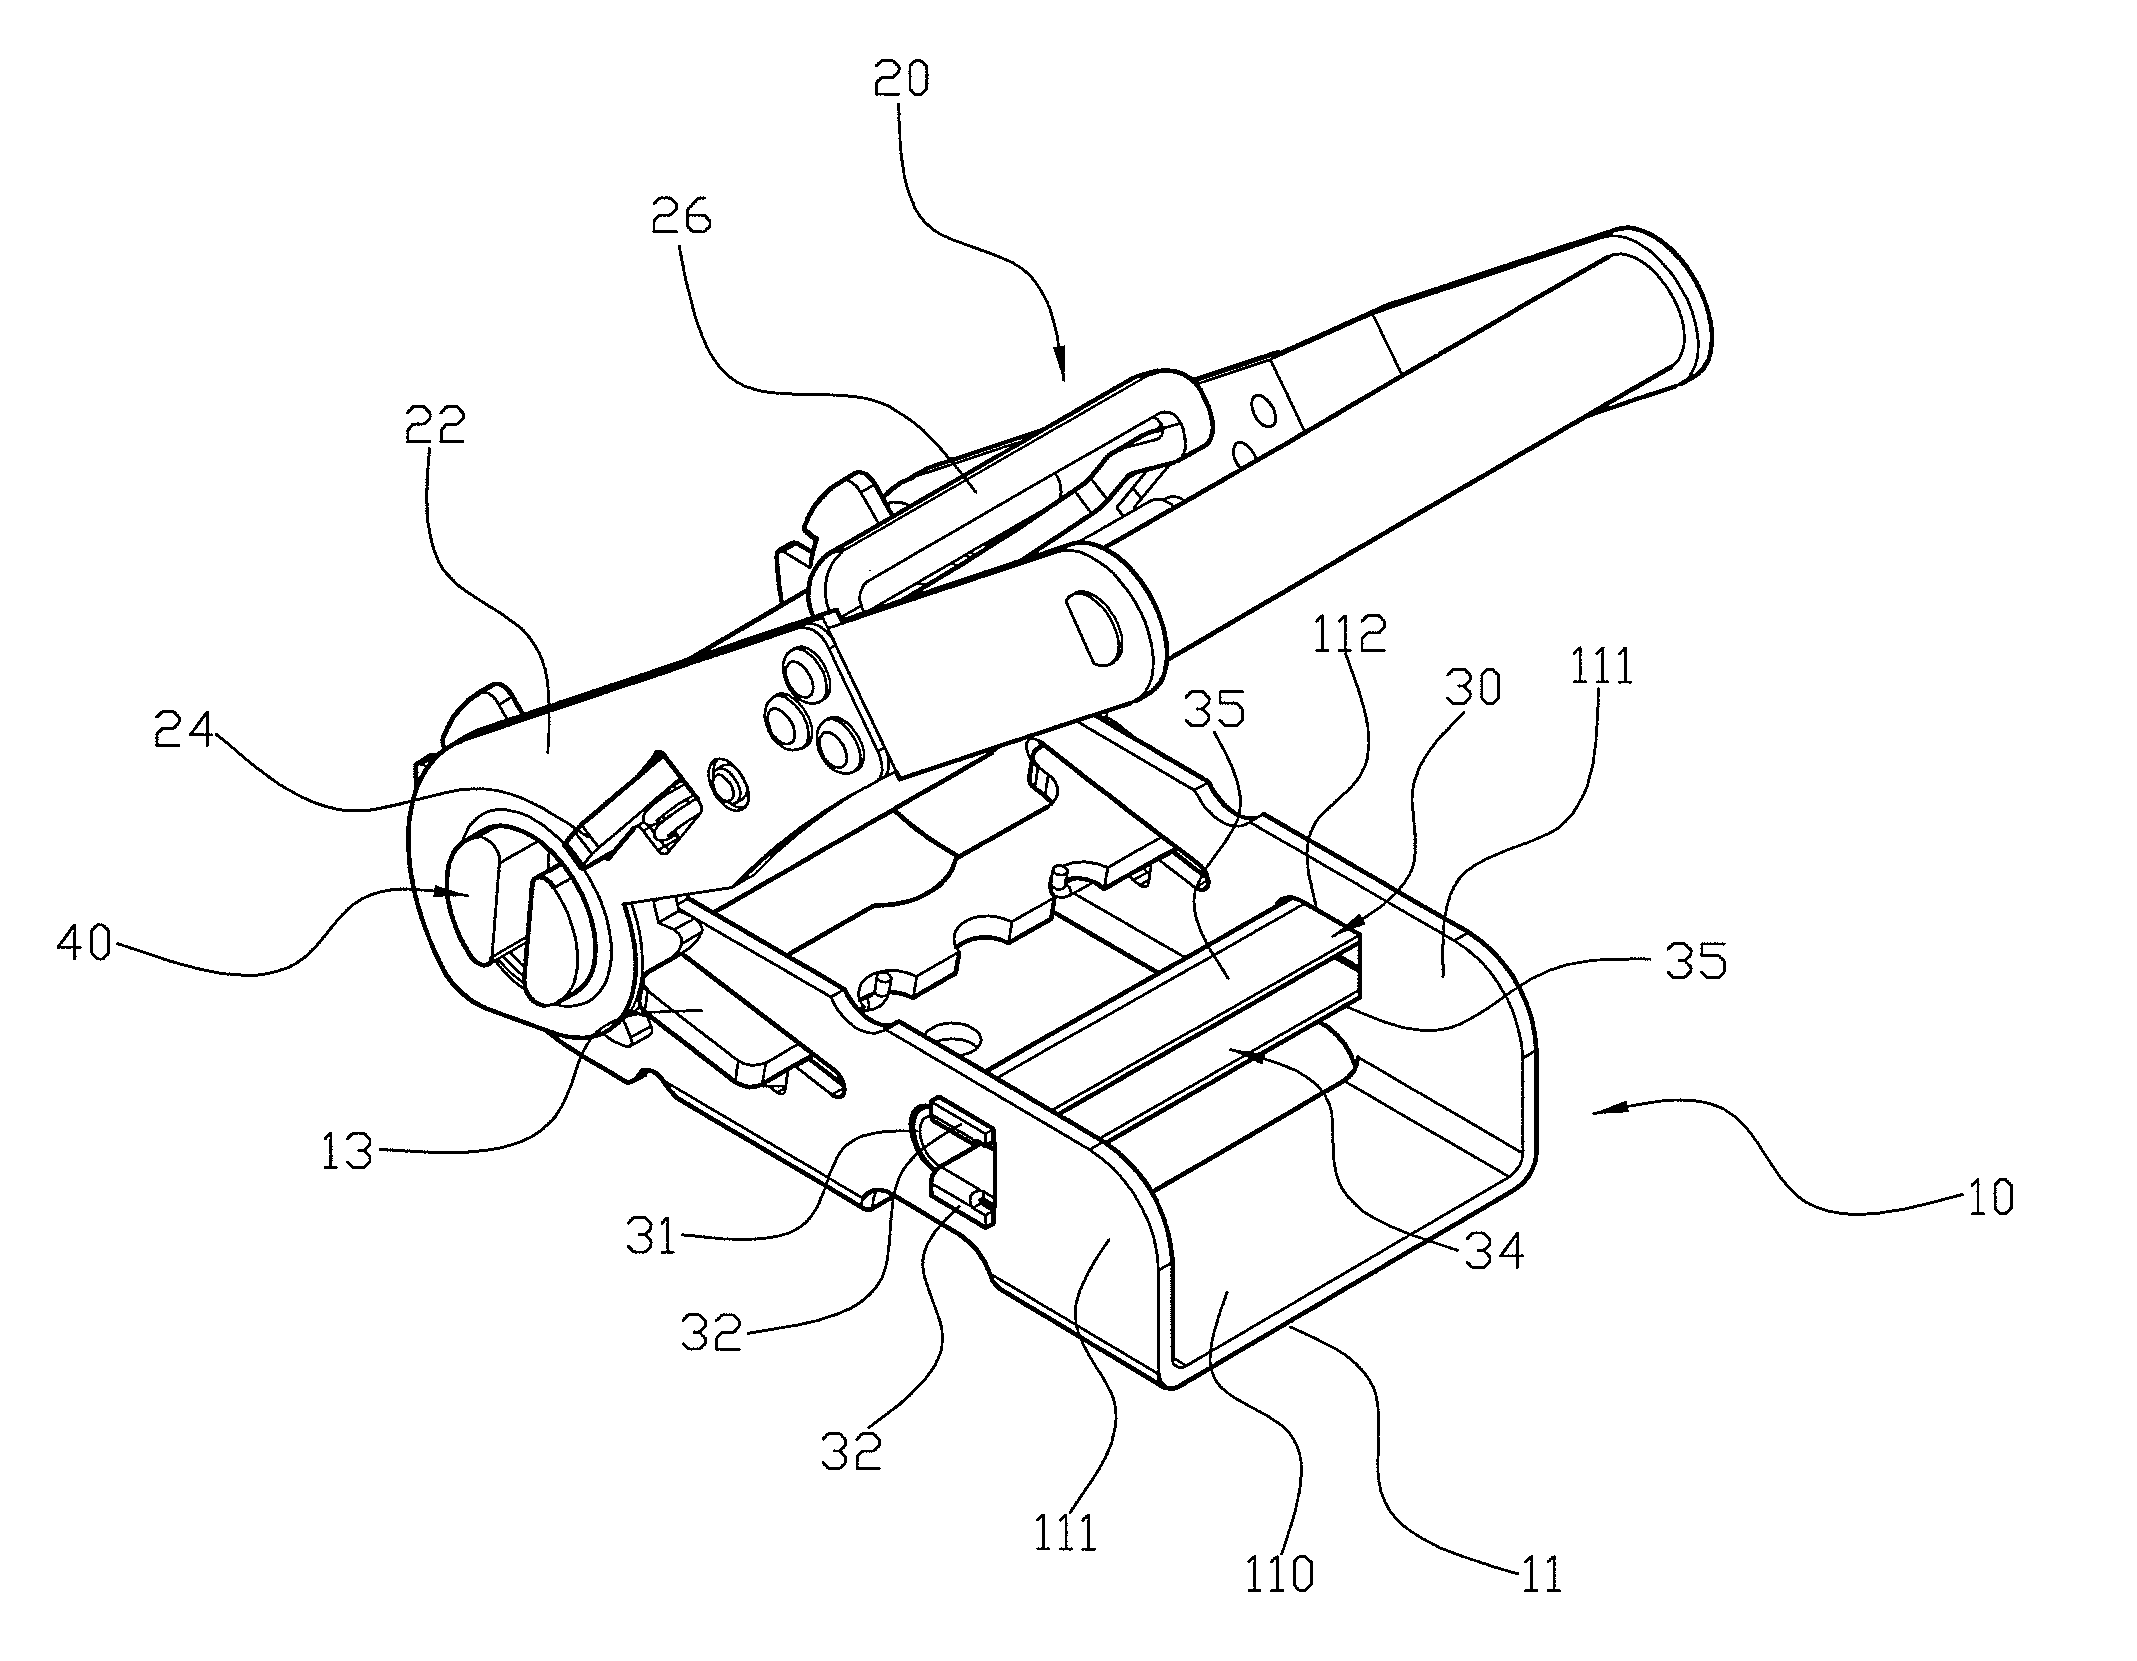 Cable tightening device with a base having a lower cost of fabrication